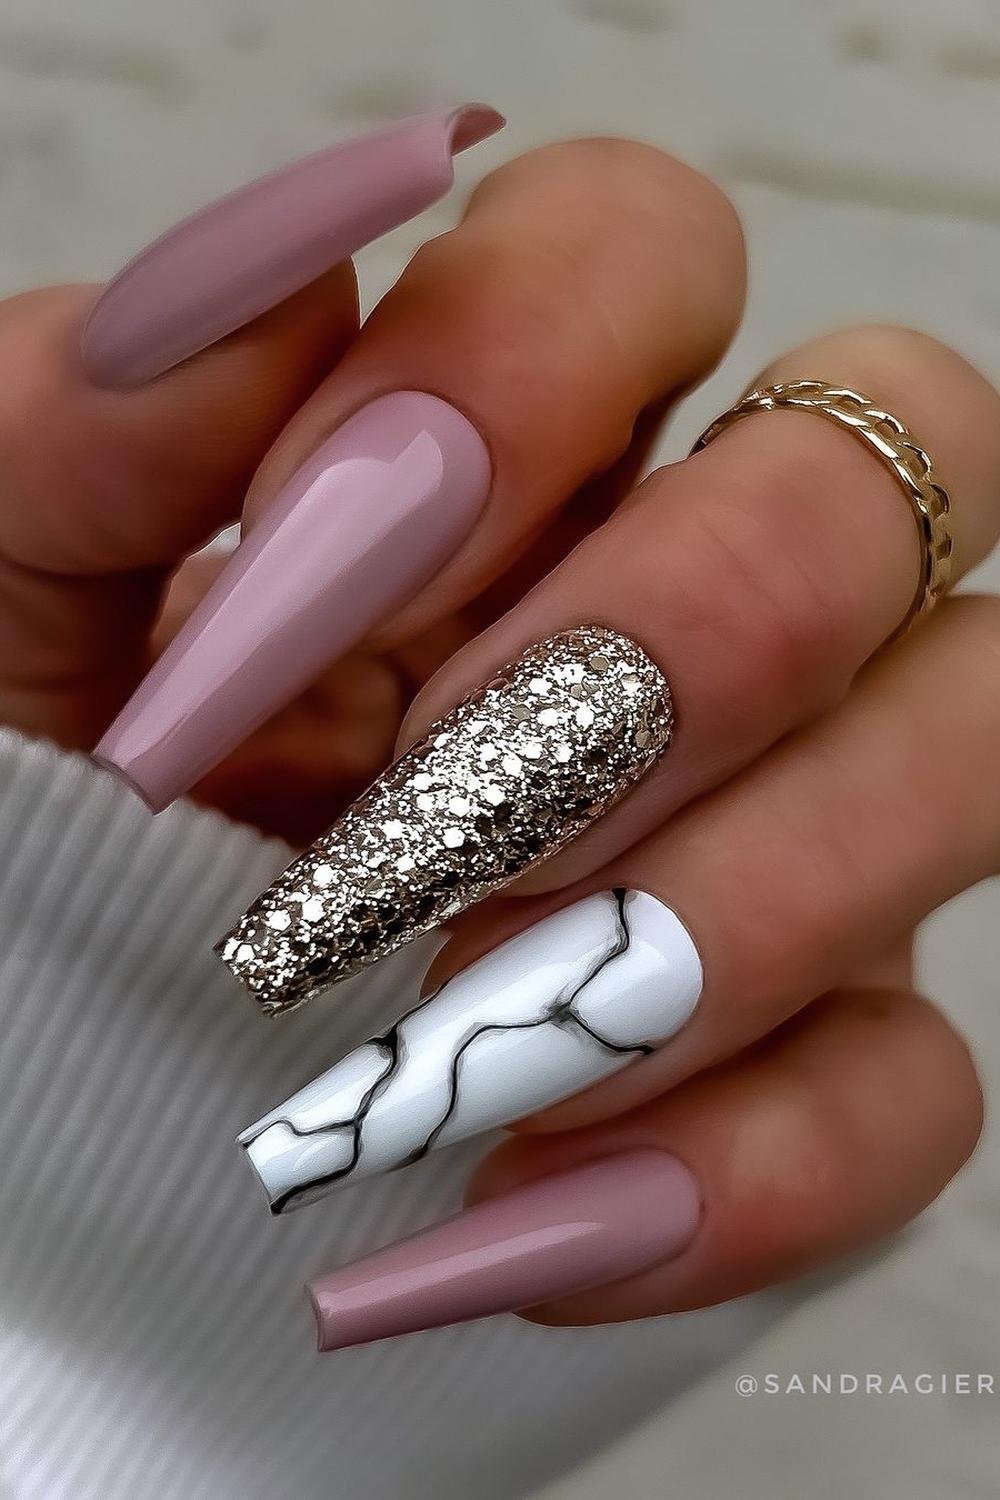 20 - Picture of Ballerina Nails